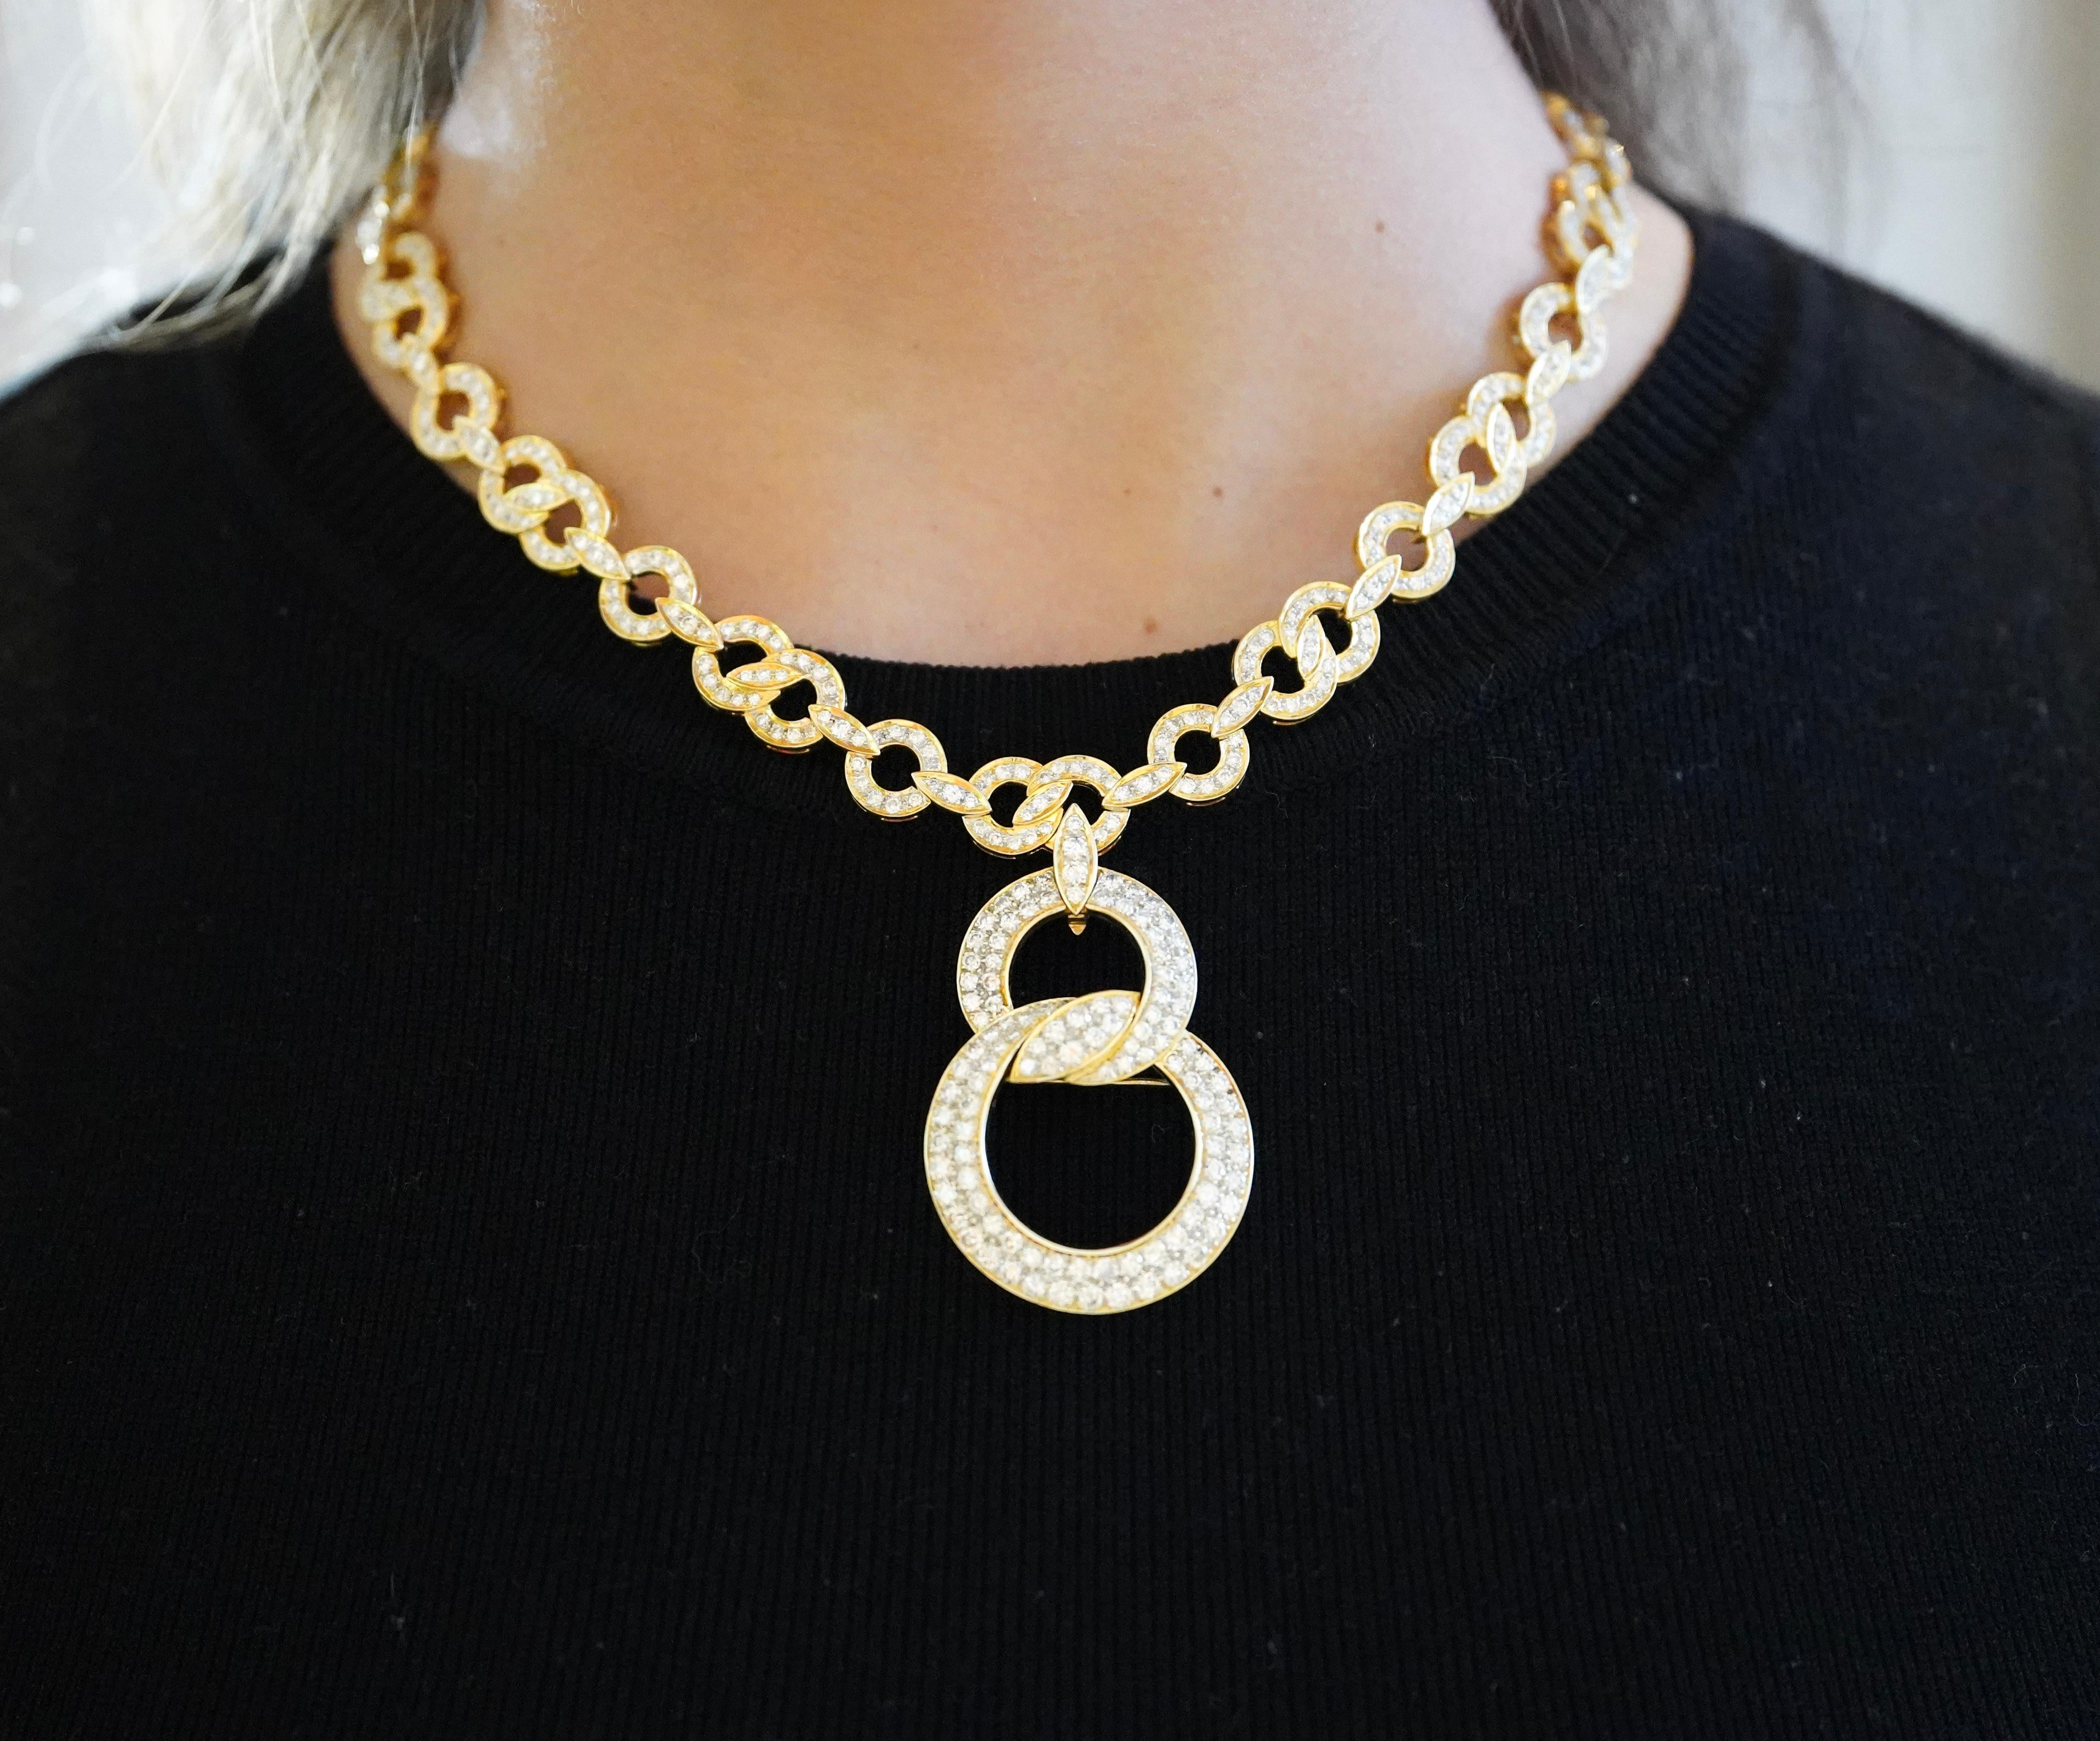 Presenting a truly inspirational 18K yellow gold pendant necklace, featuring 16 carats of round-brilliant cut diamonds, secured in a pave set interlocking setting. The interlocking small (24mm) and large (33mm) circles create a captivating piece